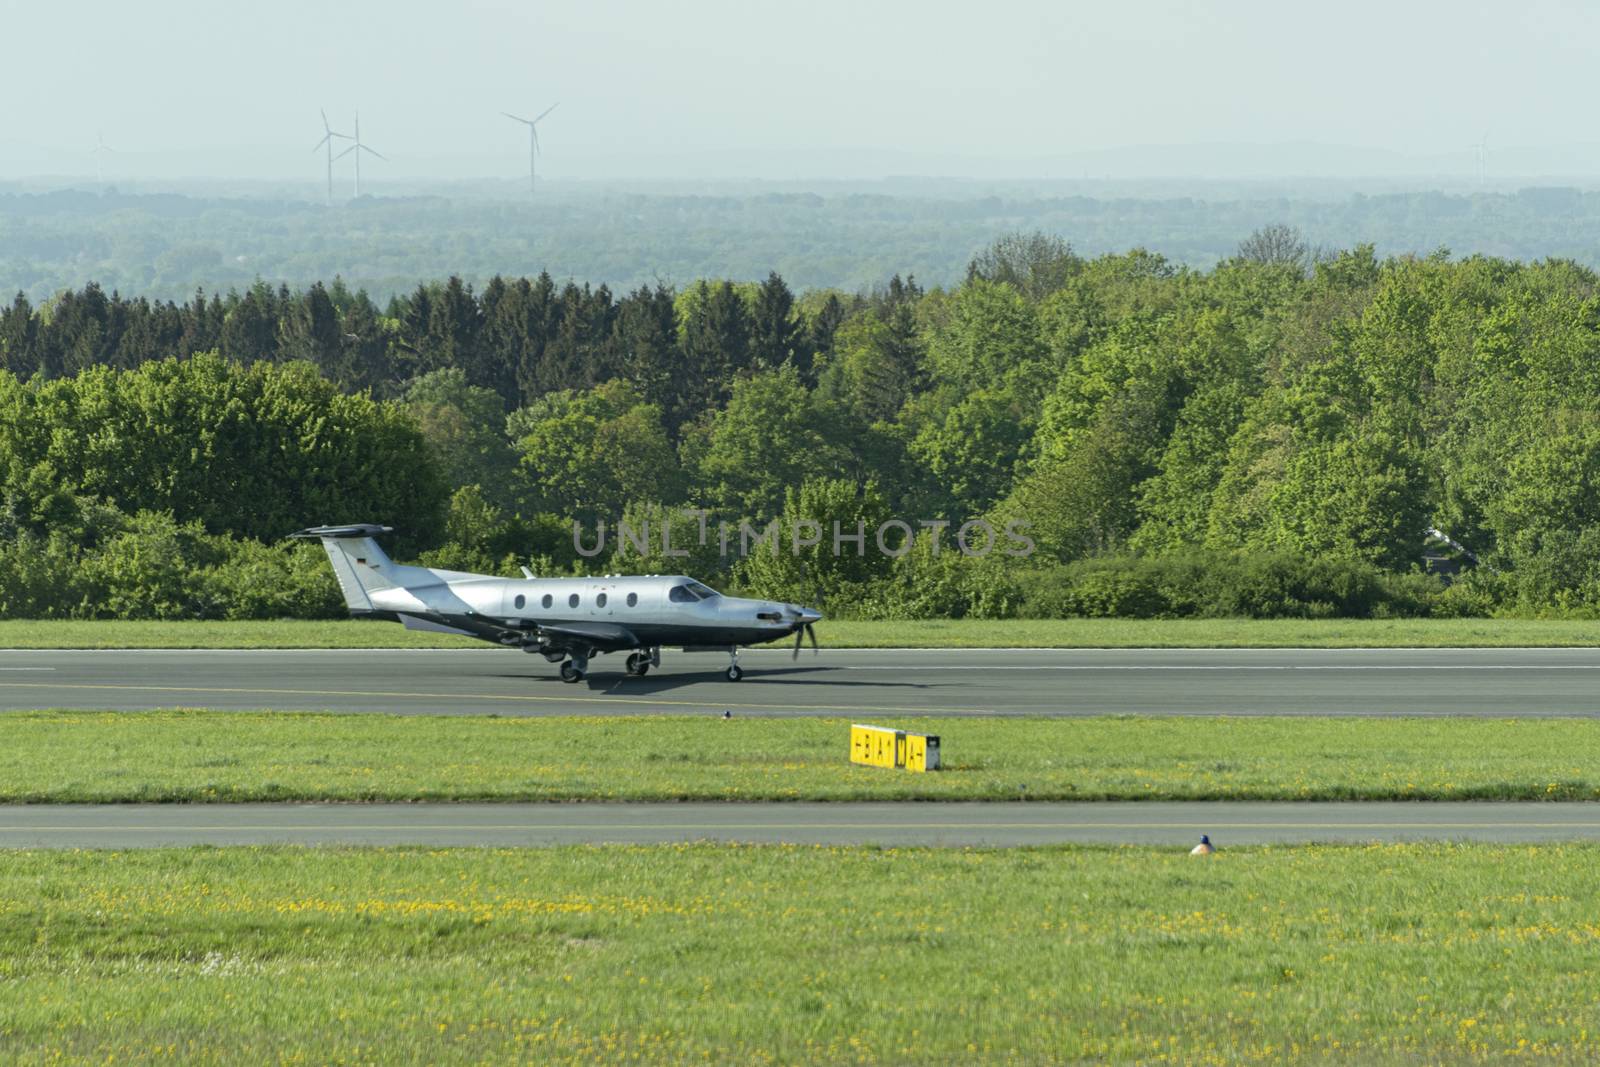 DE, North Rhine-Westphalia - April 2018: Privately owned Twin Propeller PILATUS Eagle, taxis after landing at Paderborn Airfield